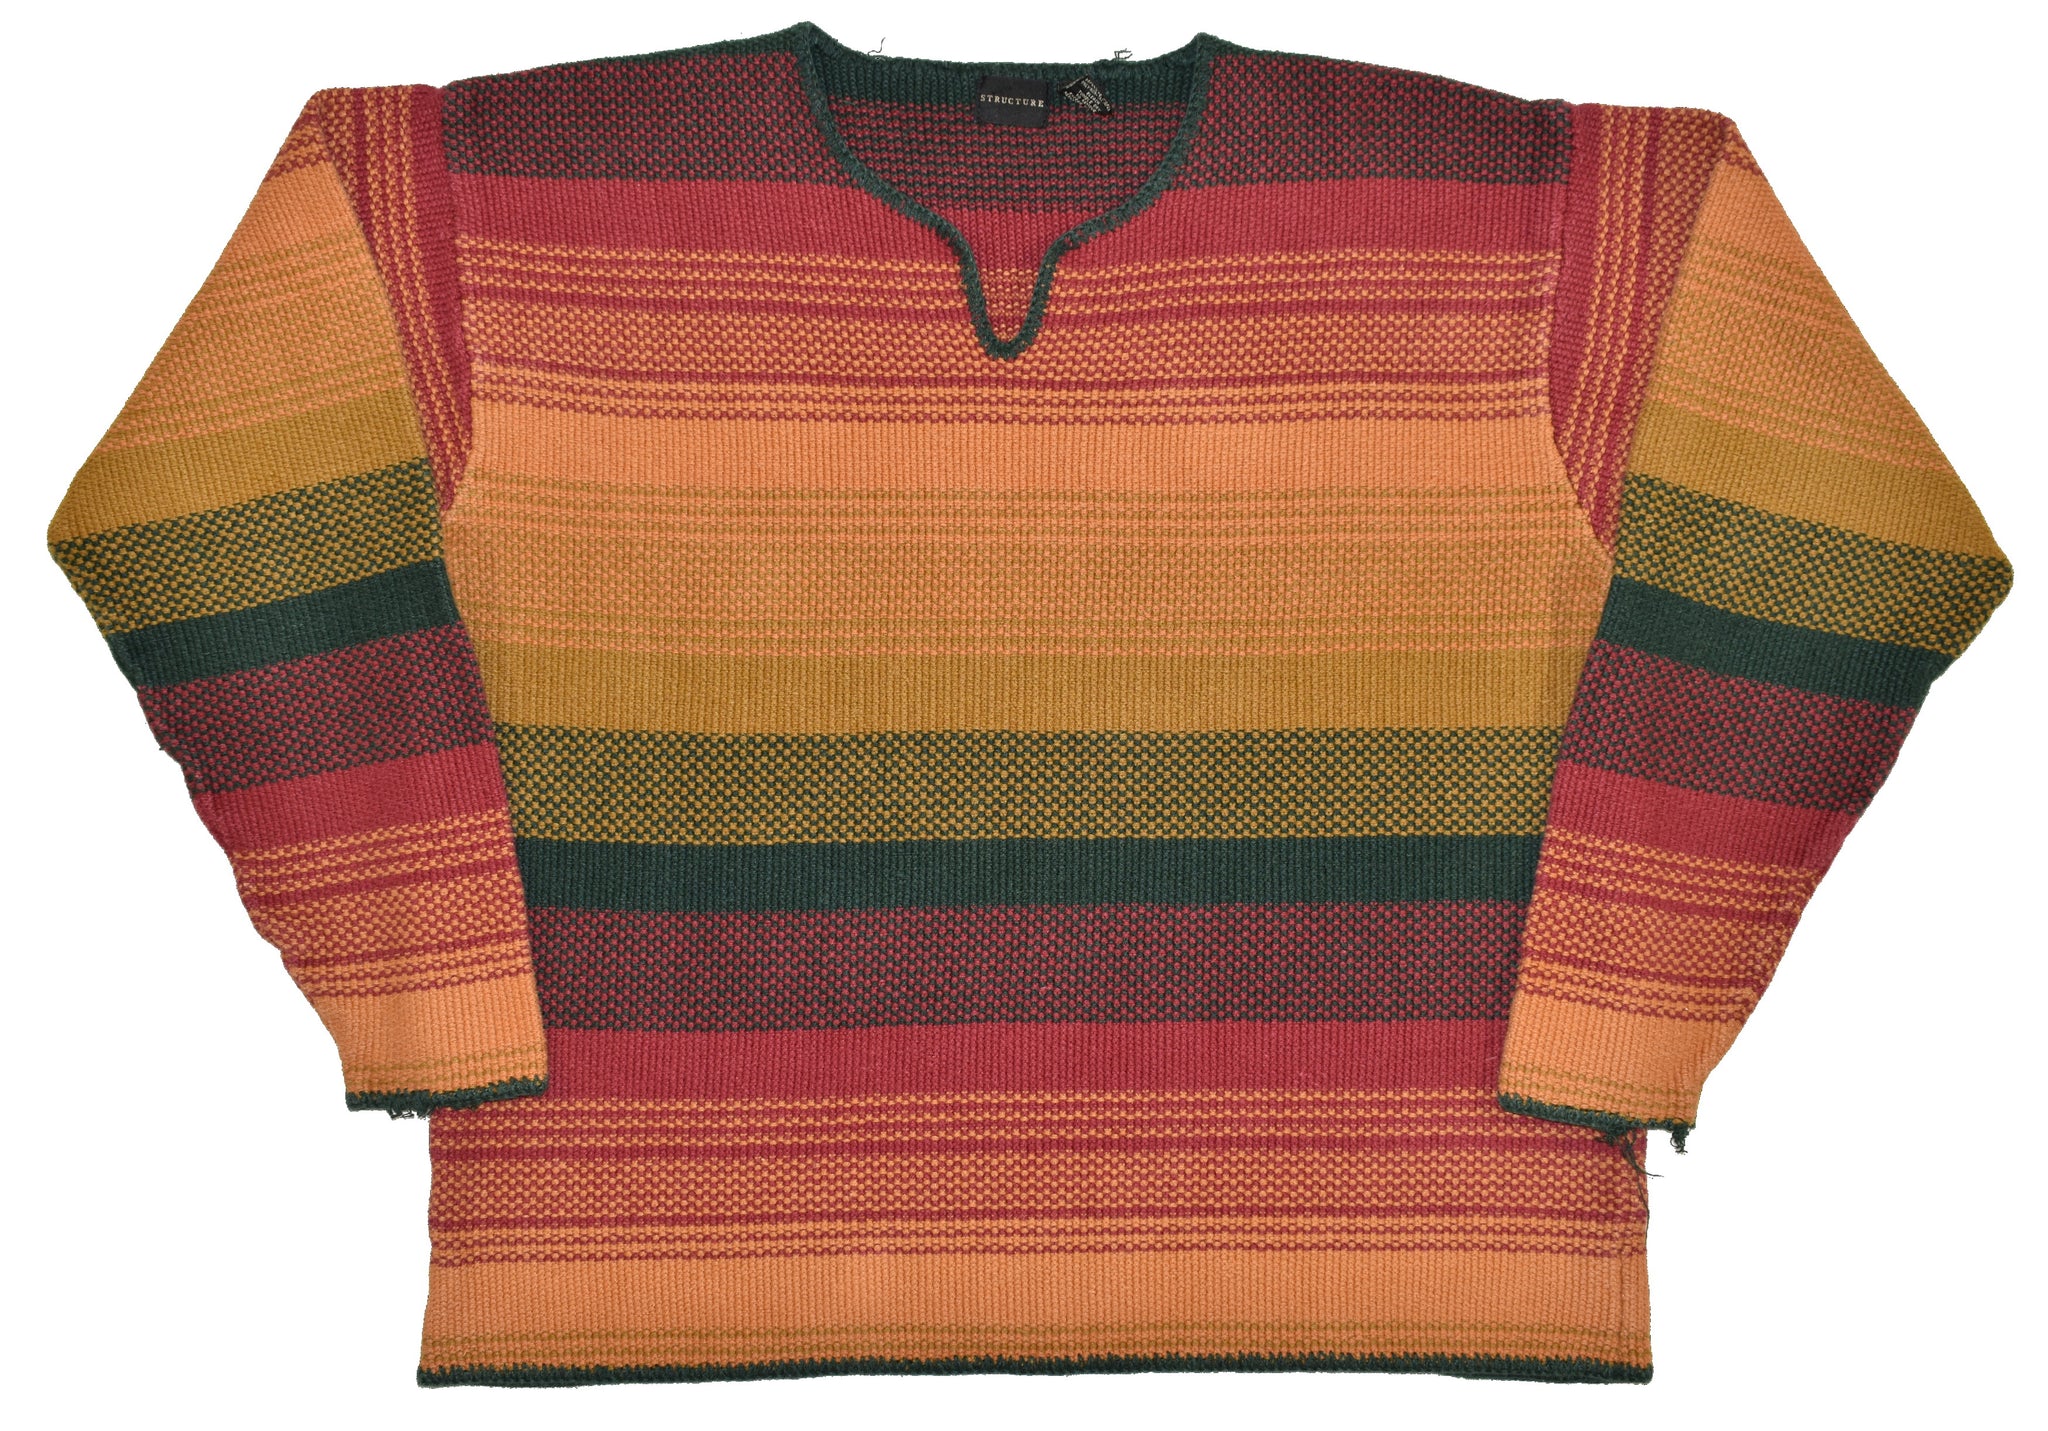 Vintage 90s Structure Multicolored Striped Knit Sweater Size Medium